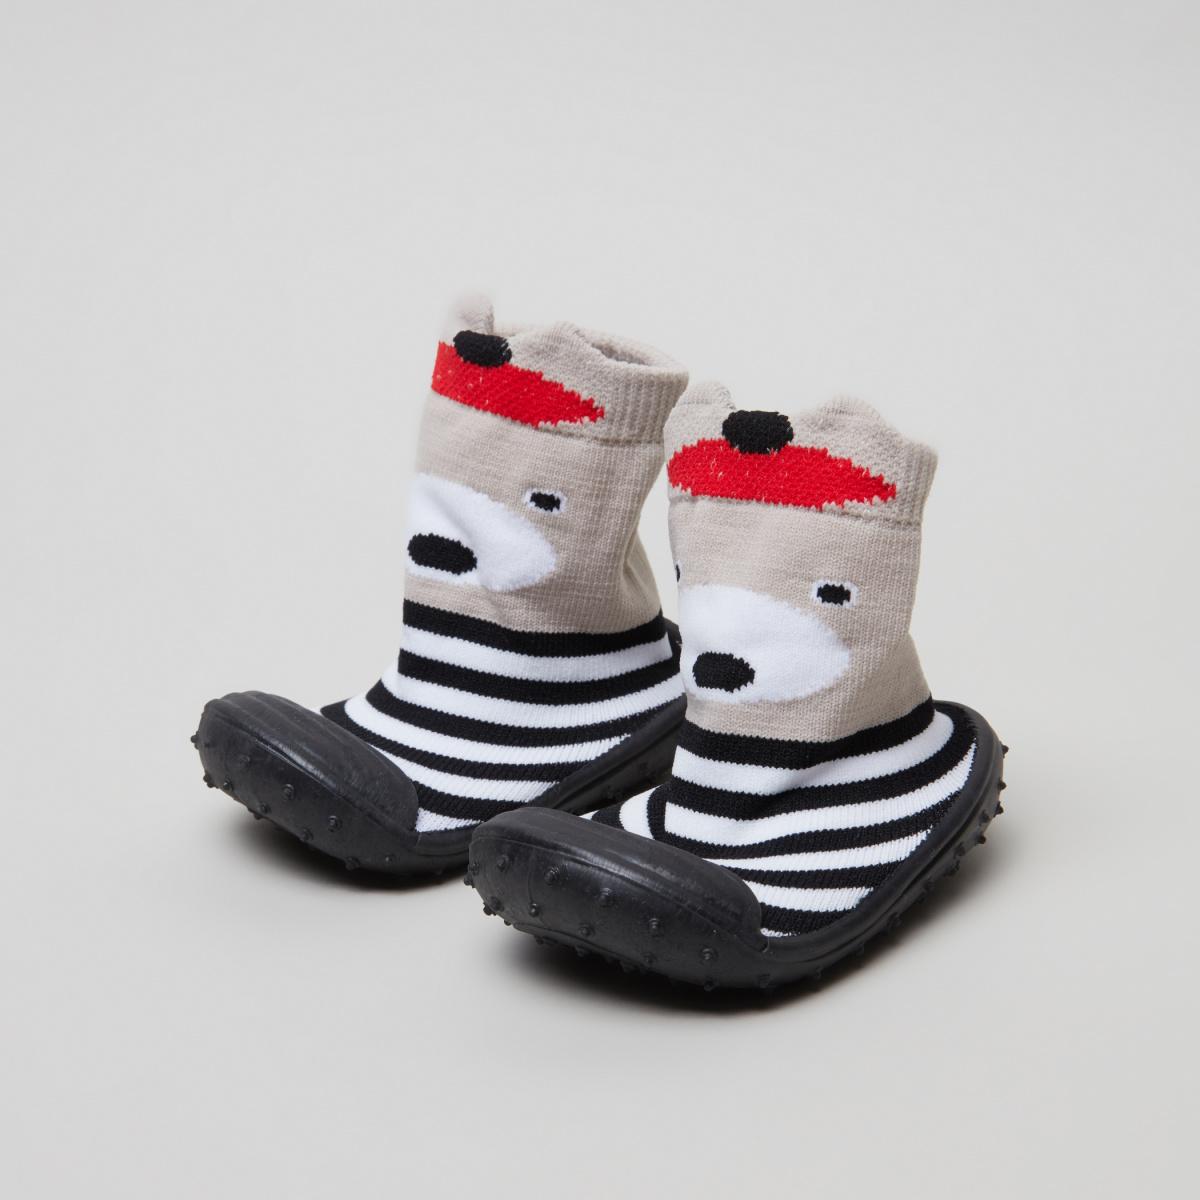 Babyshop Juniors Striped and Embroidered Baby Shoe